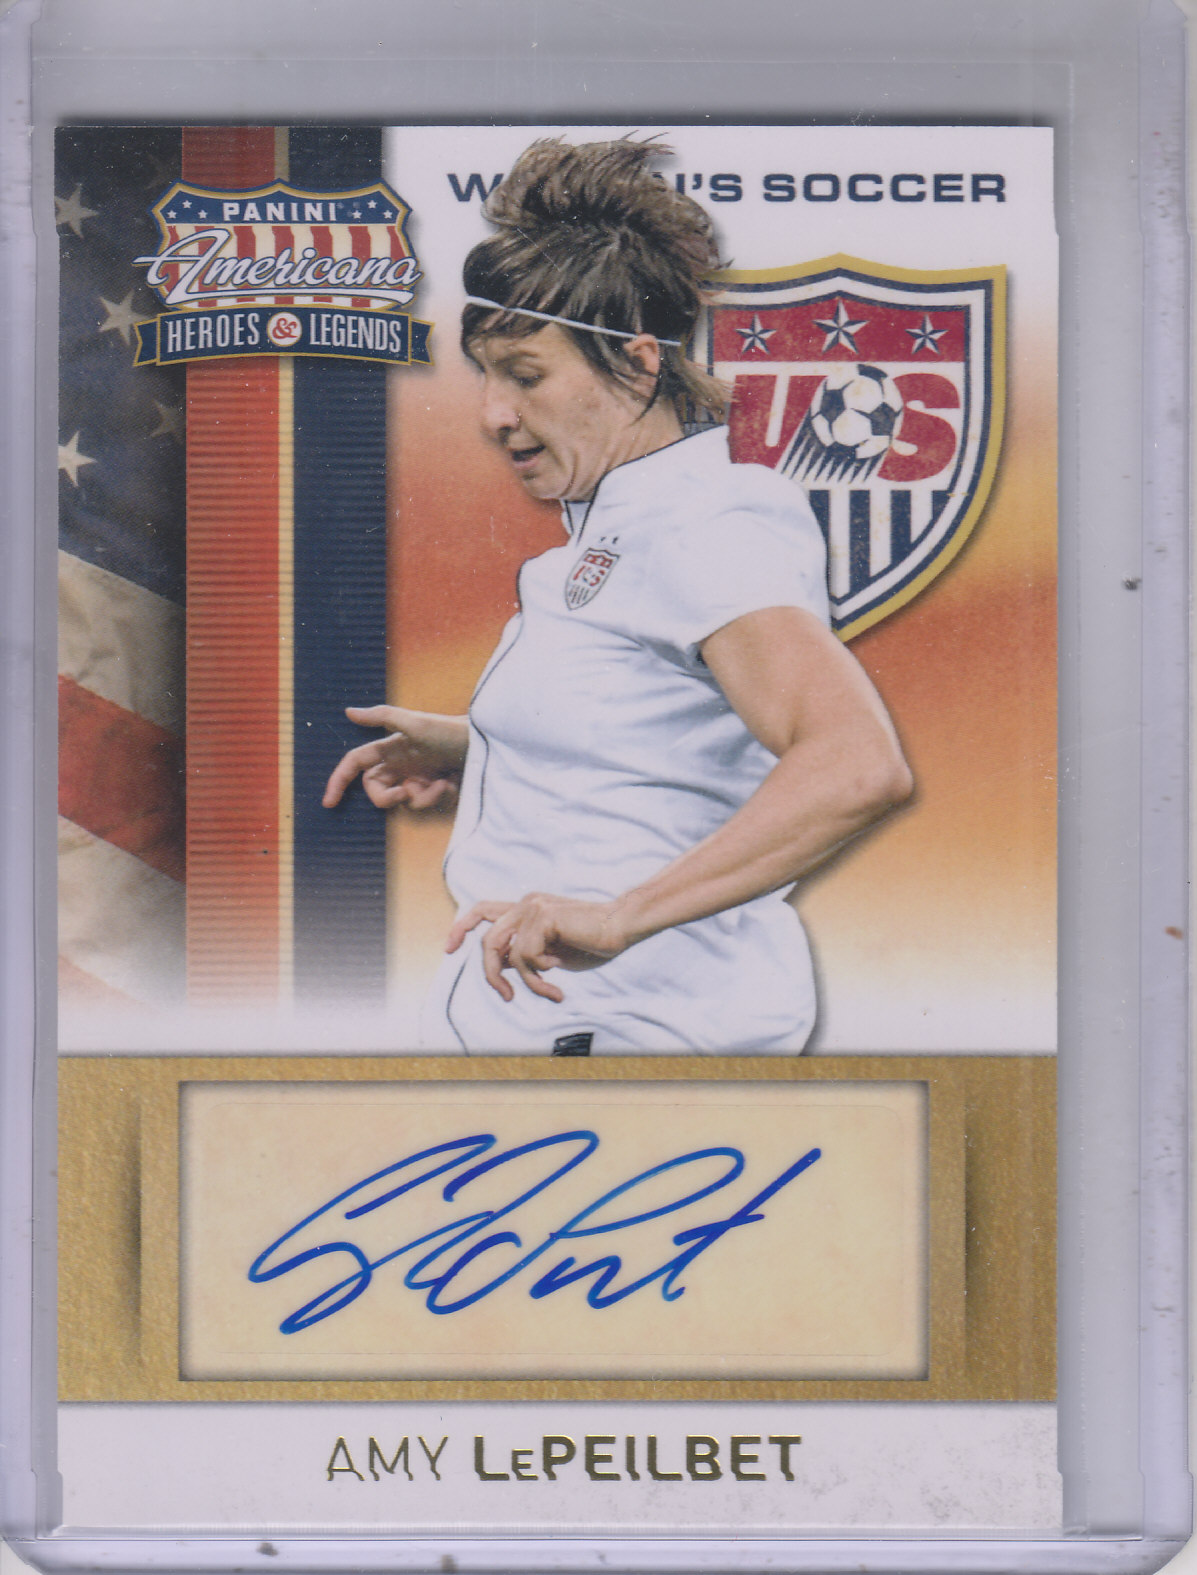 2012 Americana Heroes and Legends US Women's Soccer Autographs #4 Amy LePeilbet